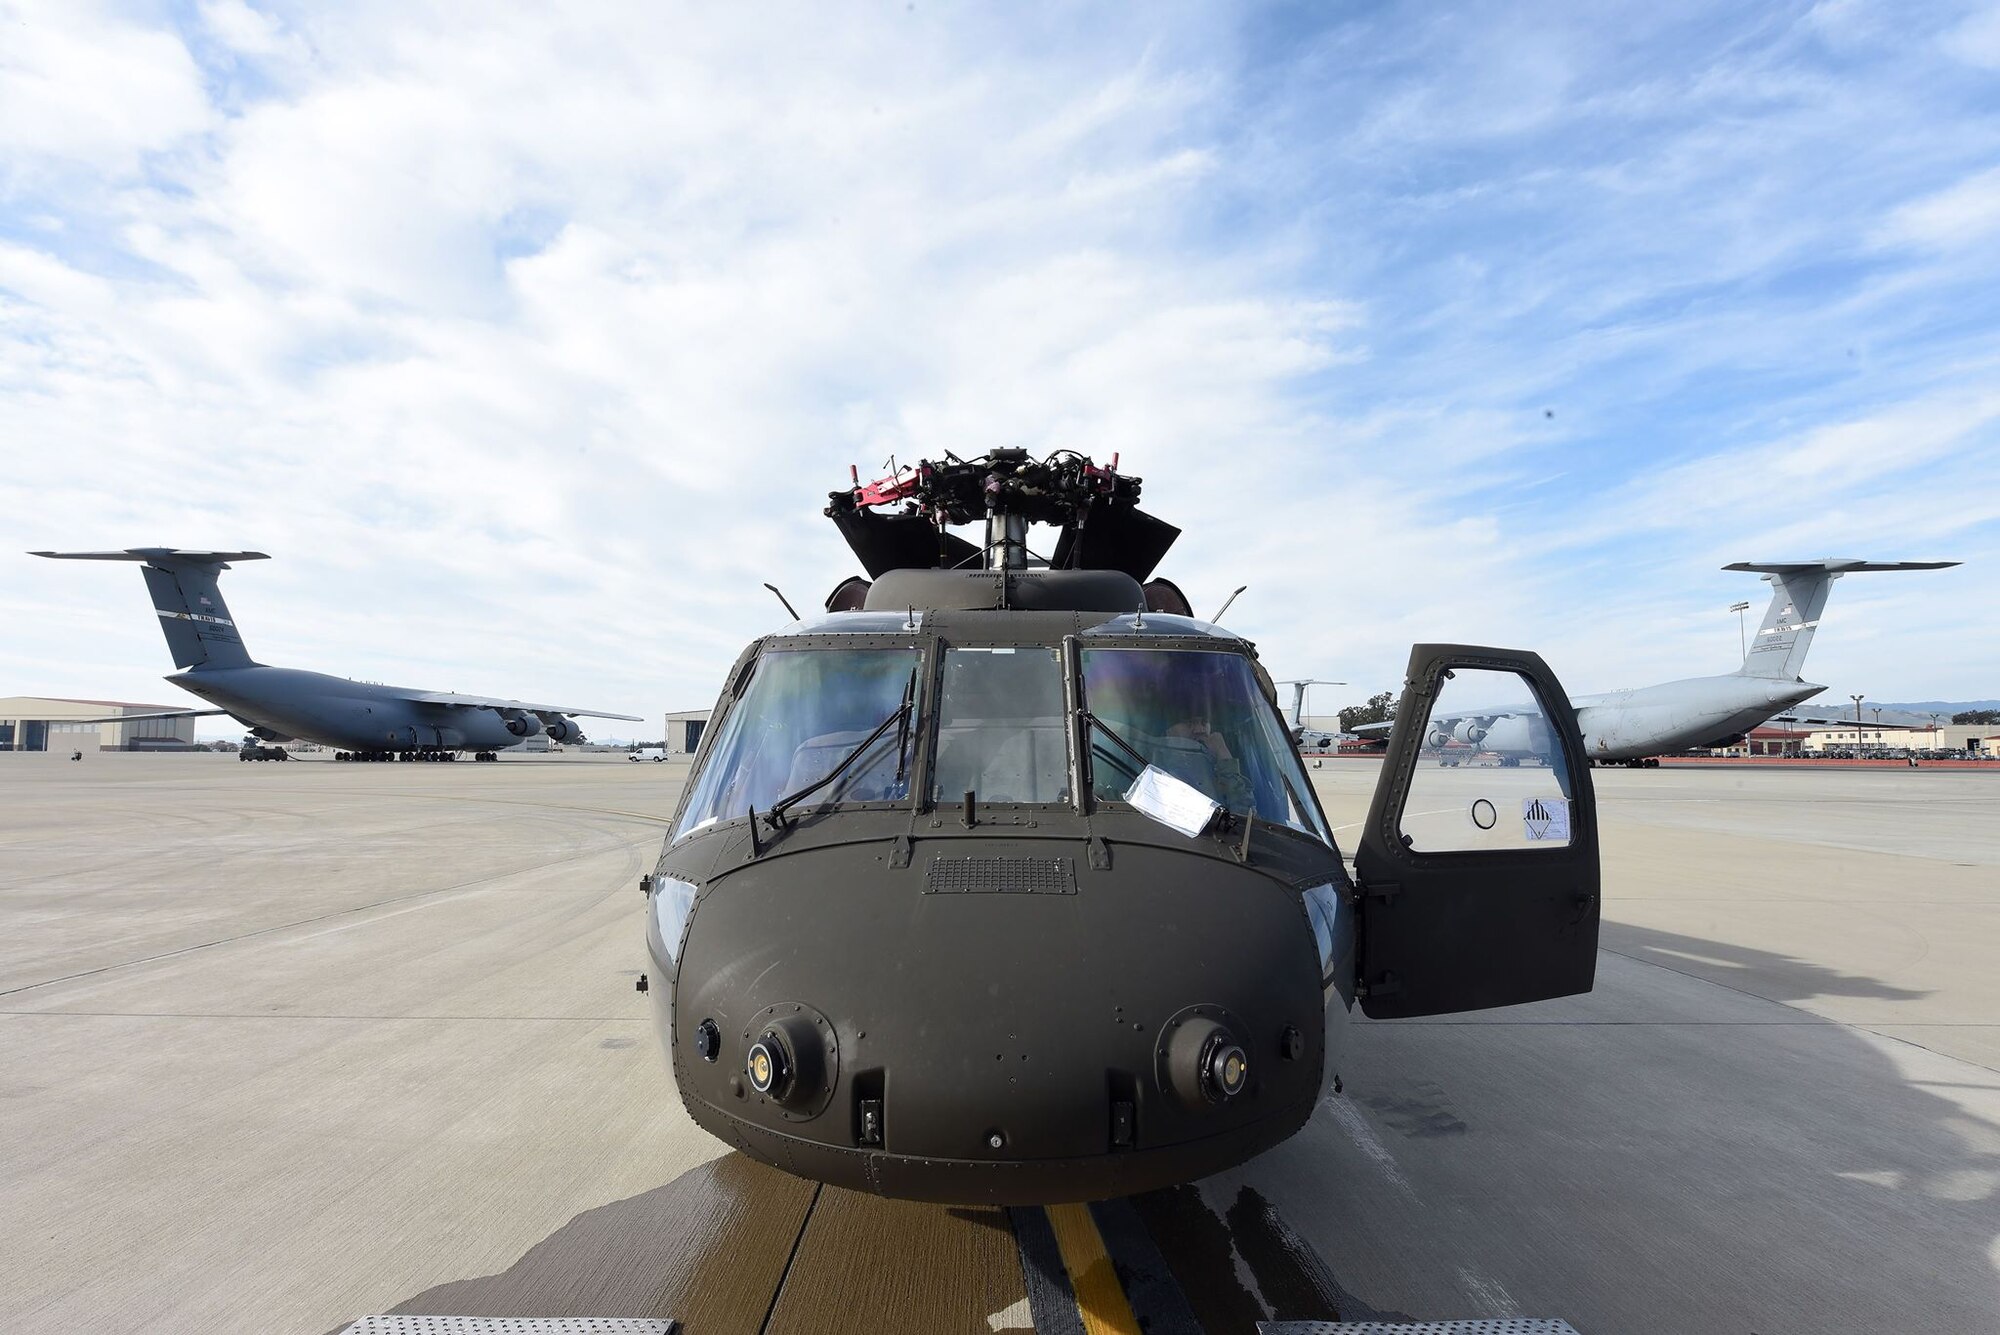 A U.S. Army UH-60 Black Hawk waits to be loaded up into a C-5M Super Galaxy as part of full-spectrum readiness training January 13 at Travis Air Force Base, Calif. The Black Hawks’ normal transport is the C-17 Globemaster III, but the C-5M was offered as transport to the Army in the interest of full-spectrum readiness training for Travis’ C-5M personnel. (U.S. Air Force photo by Airman 1st Class Christian Conrad)